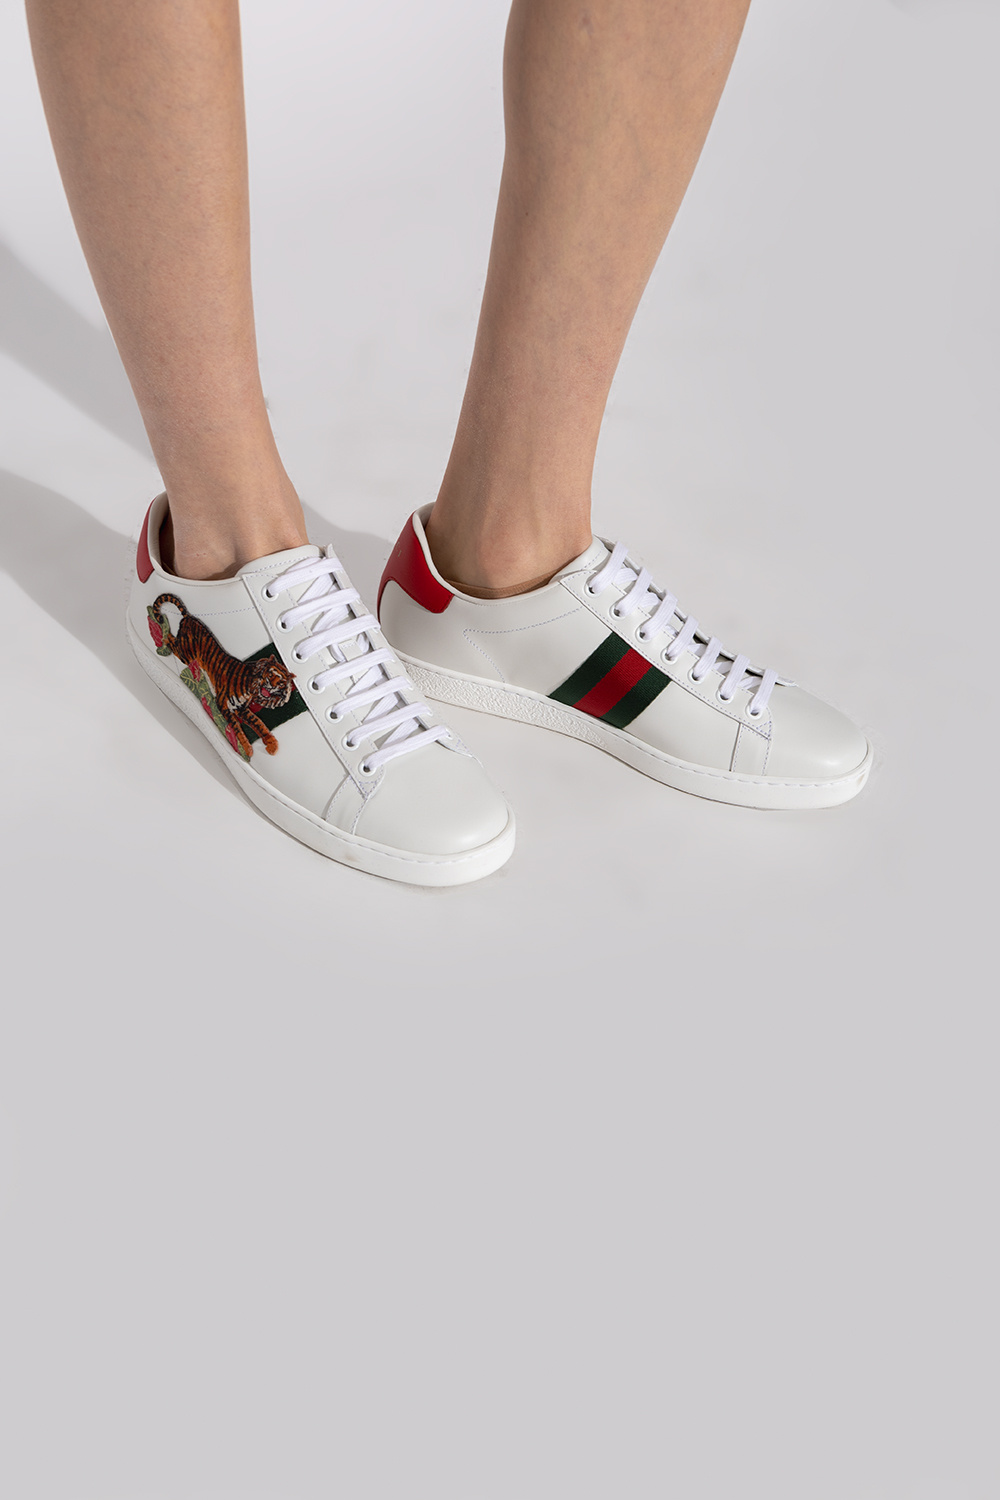 Afvige to uger Citere White Sneakers from the 'Gucci Tiger' collection Gucci - Vitkac KR